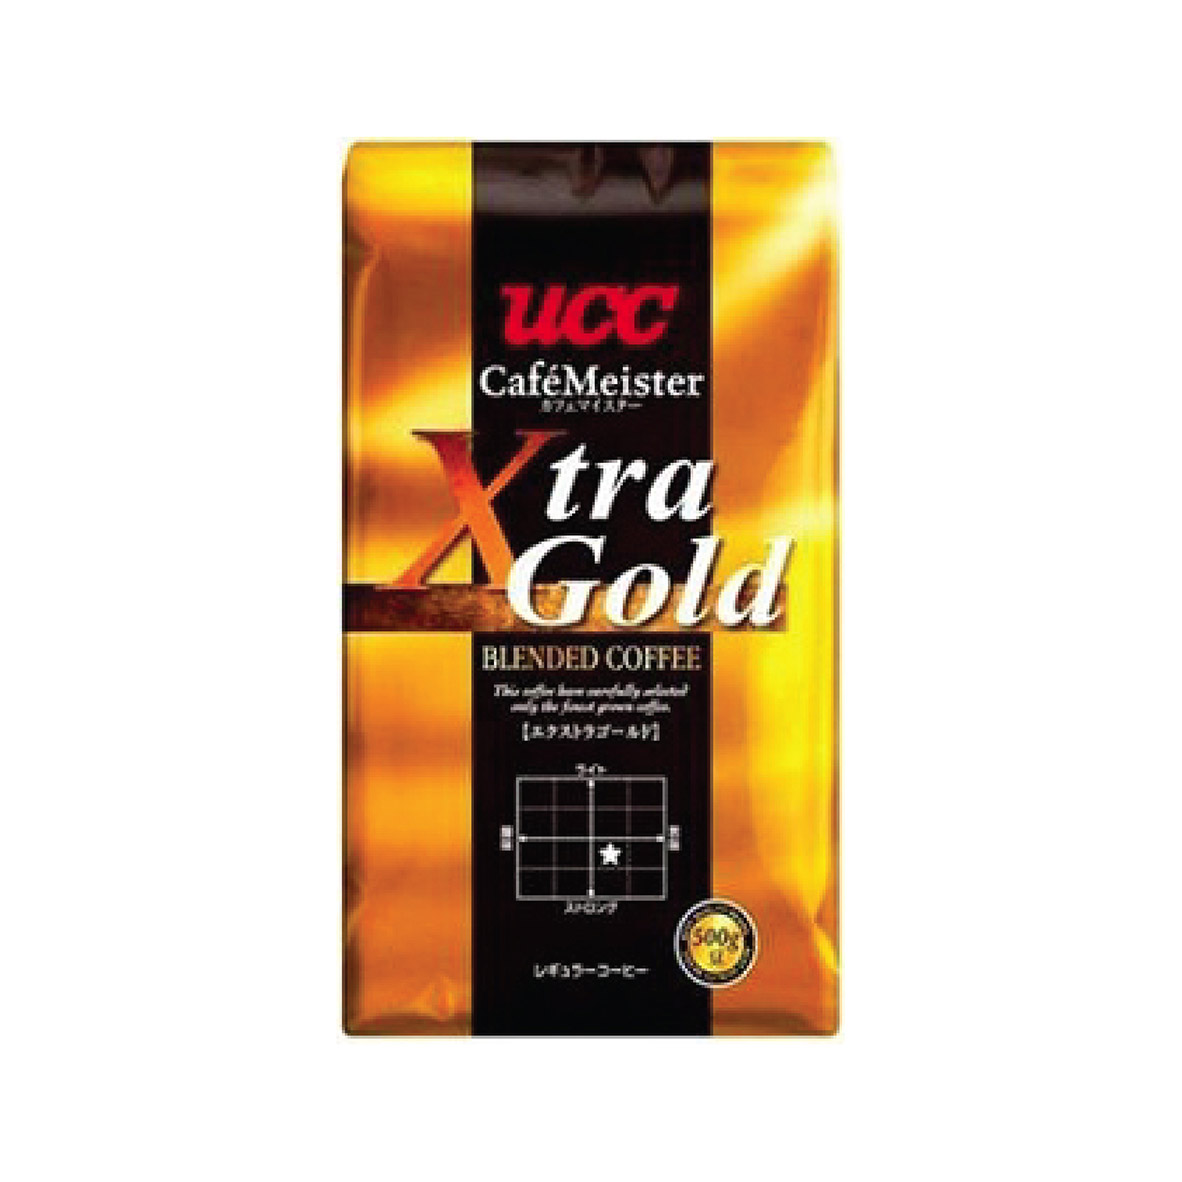 UCC CafeMeister Extra Gold